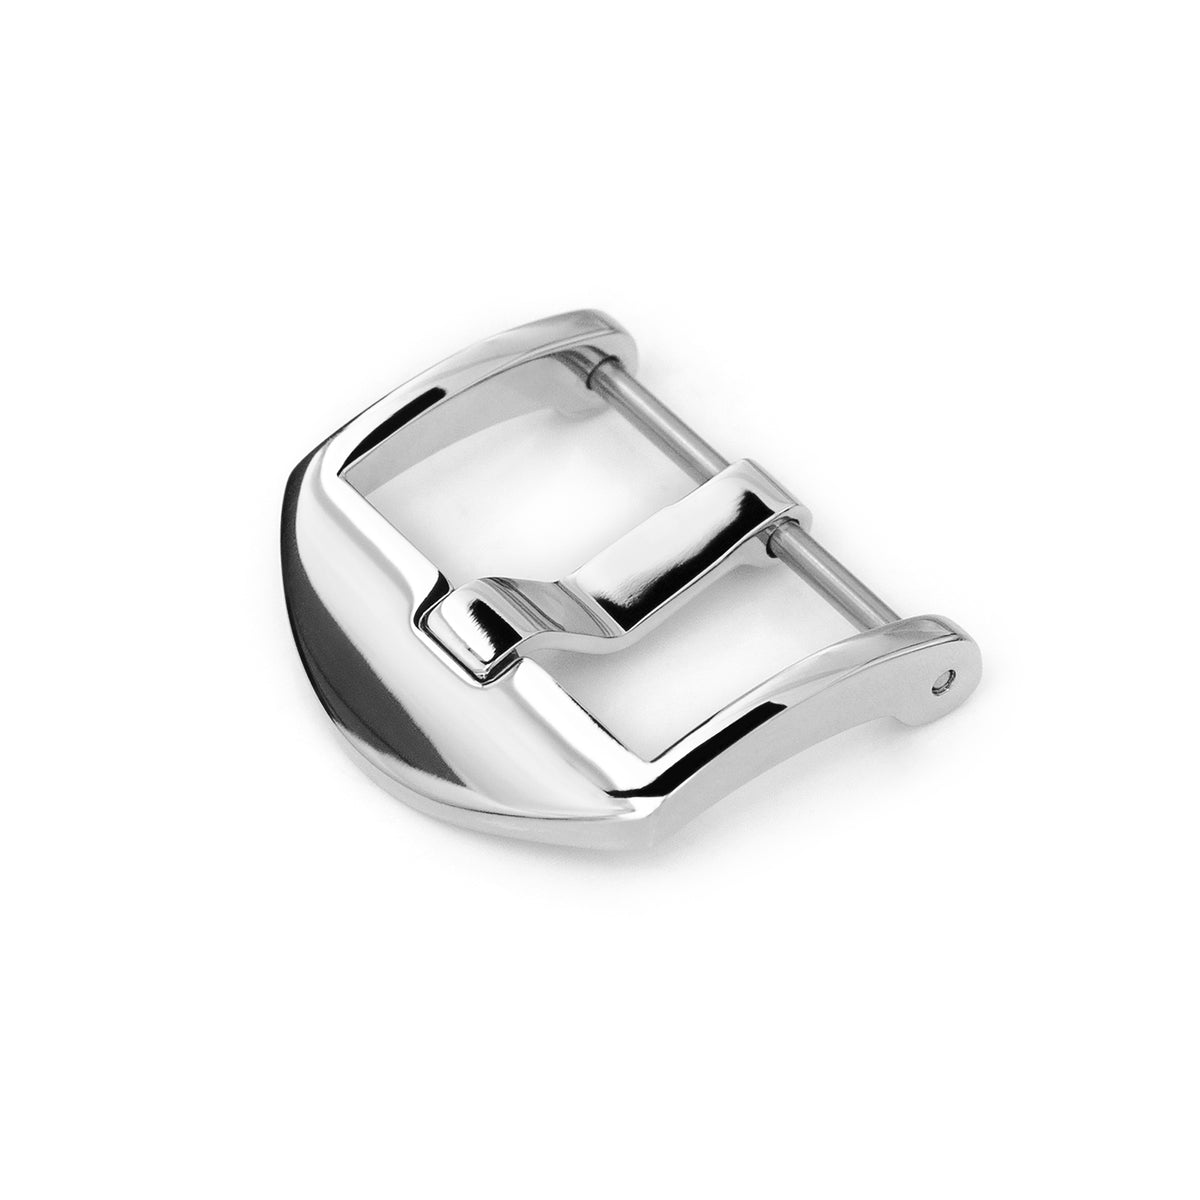 20mm, 22mm Stainless Steel 316L Polished Screw-in Buckle